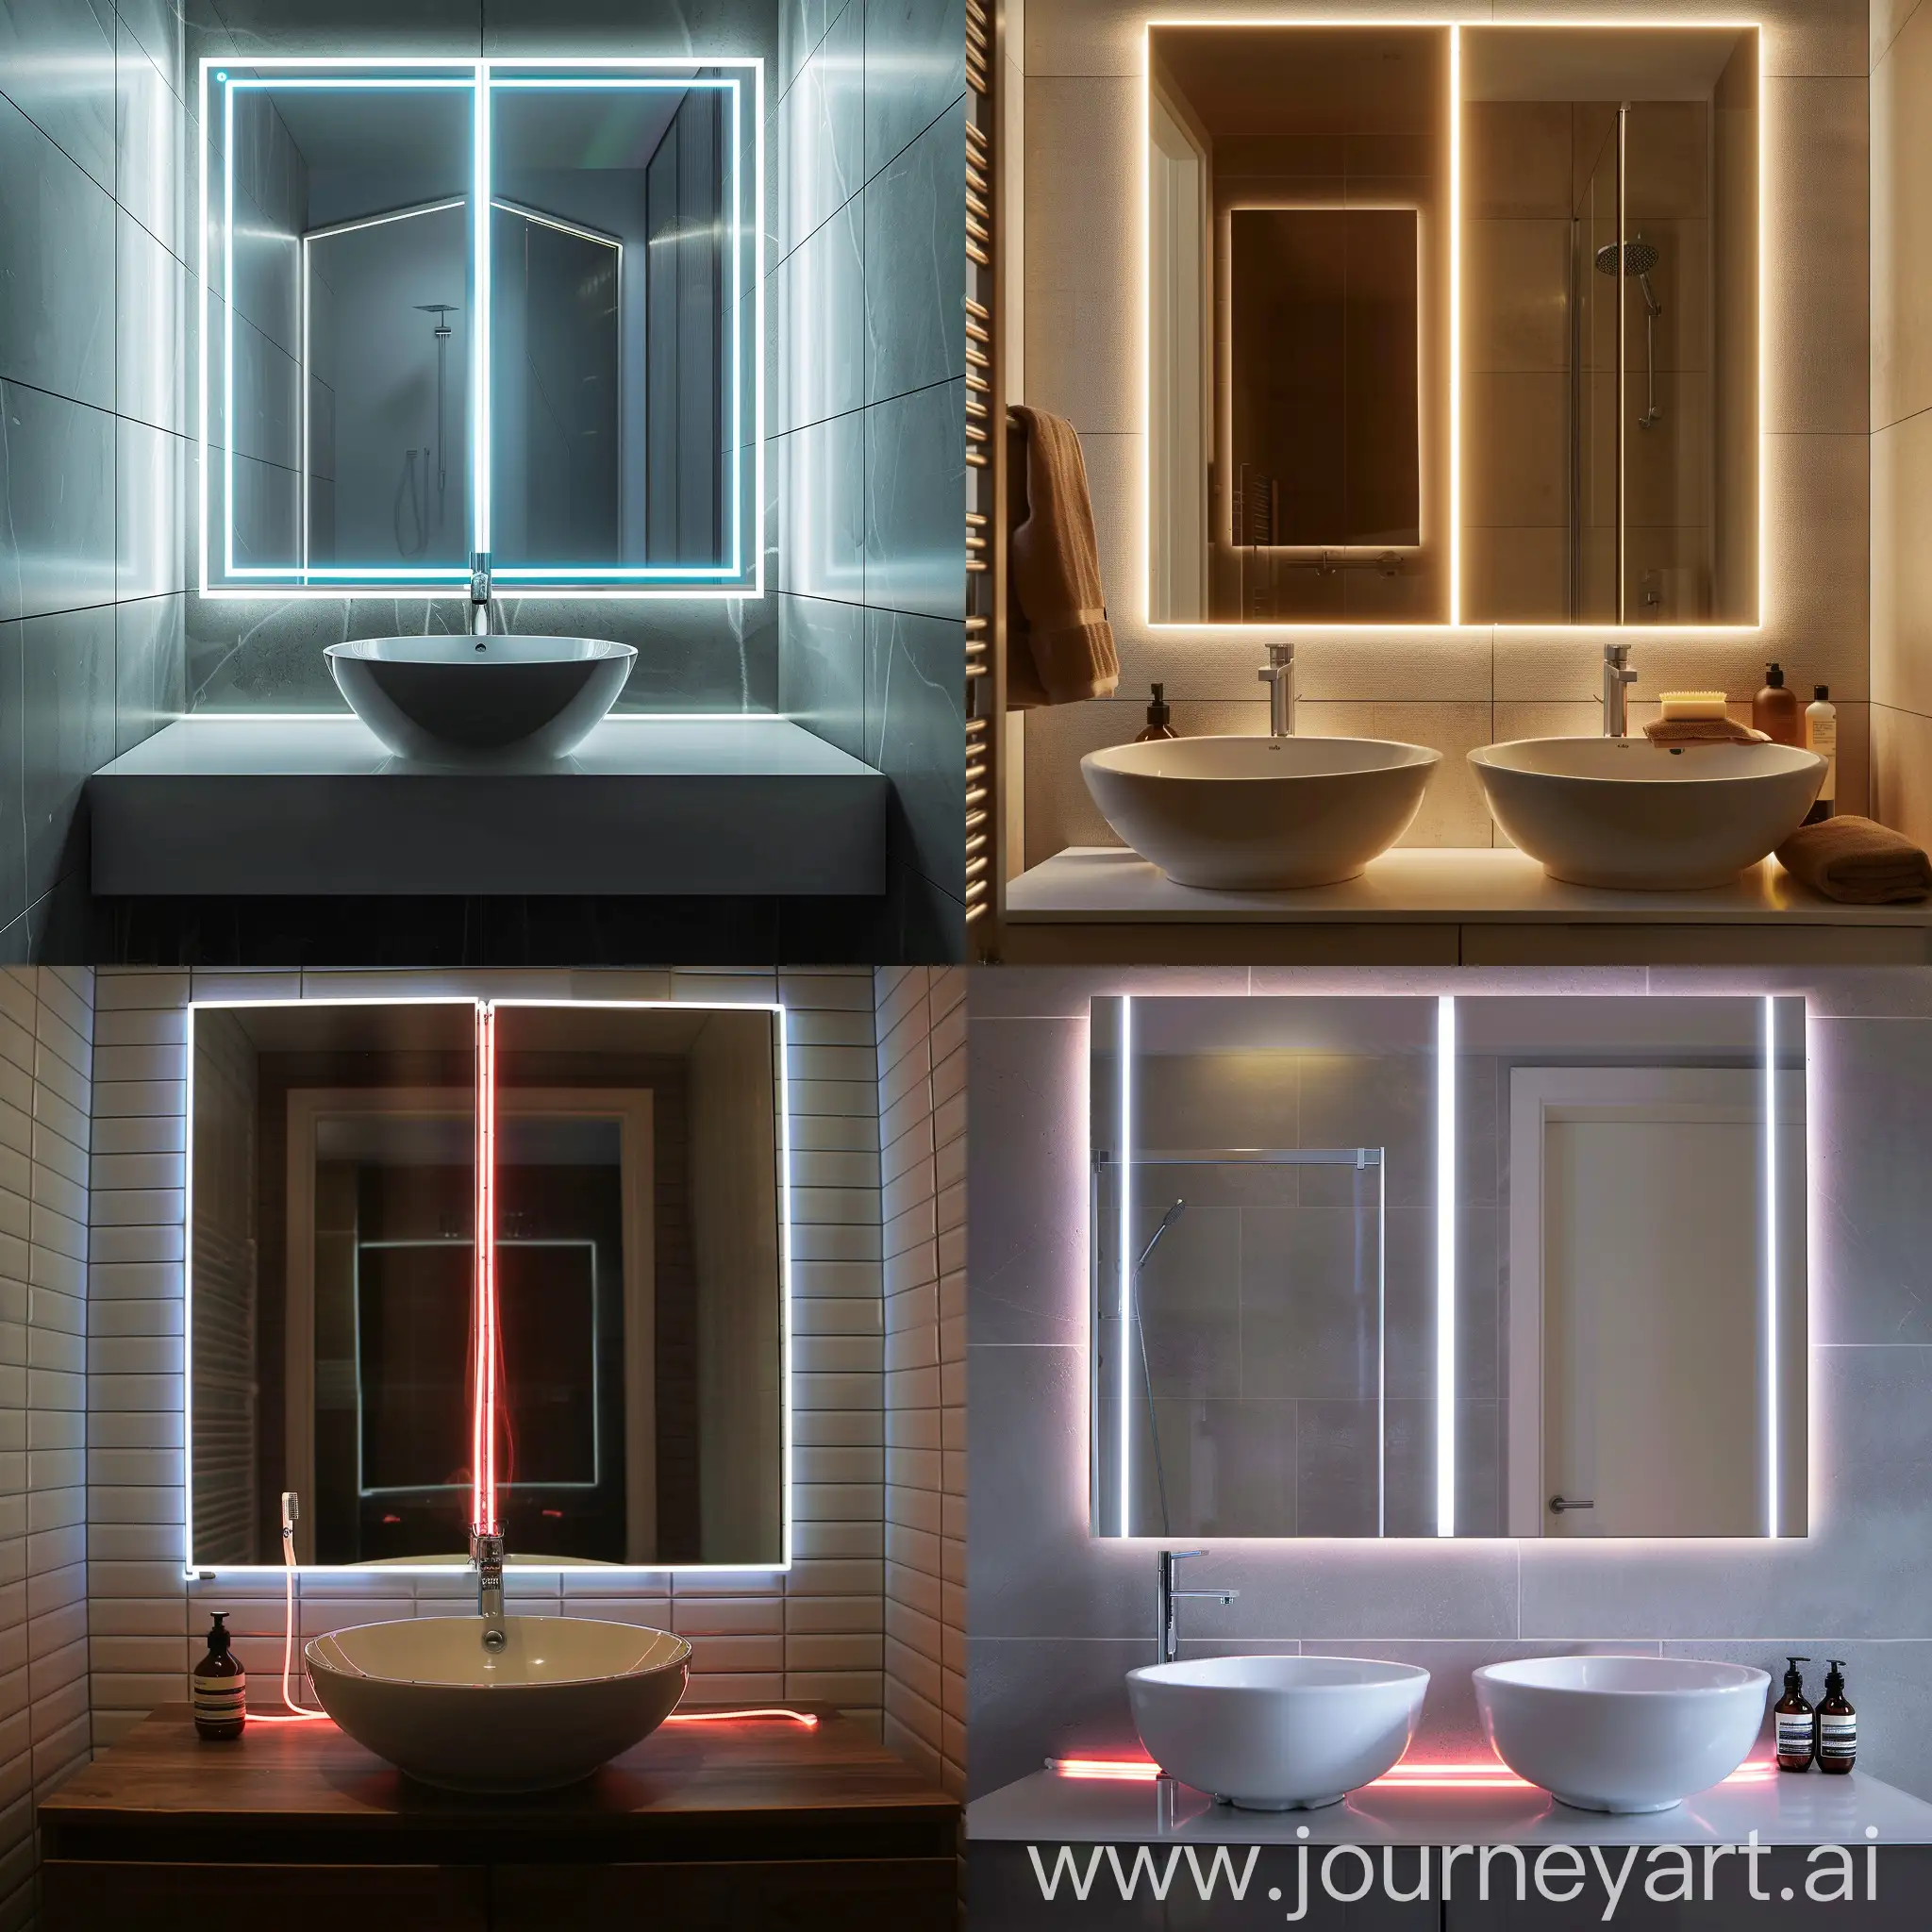 Create an image of bathroom wall with mirror and washbasin. Mirror size is 18 inch in width and 24 in height. There is 5m neon flexible strip light as well. The neon light should cover all four side of mirror and create aesthetic design with extra neon light